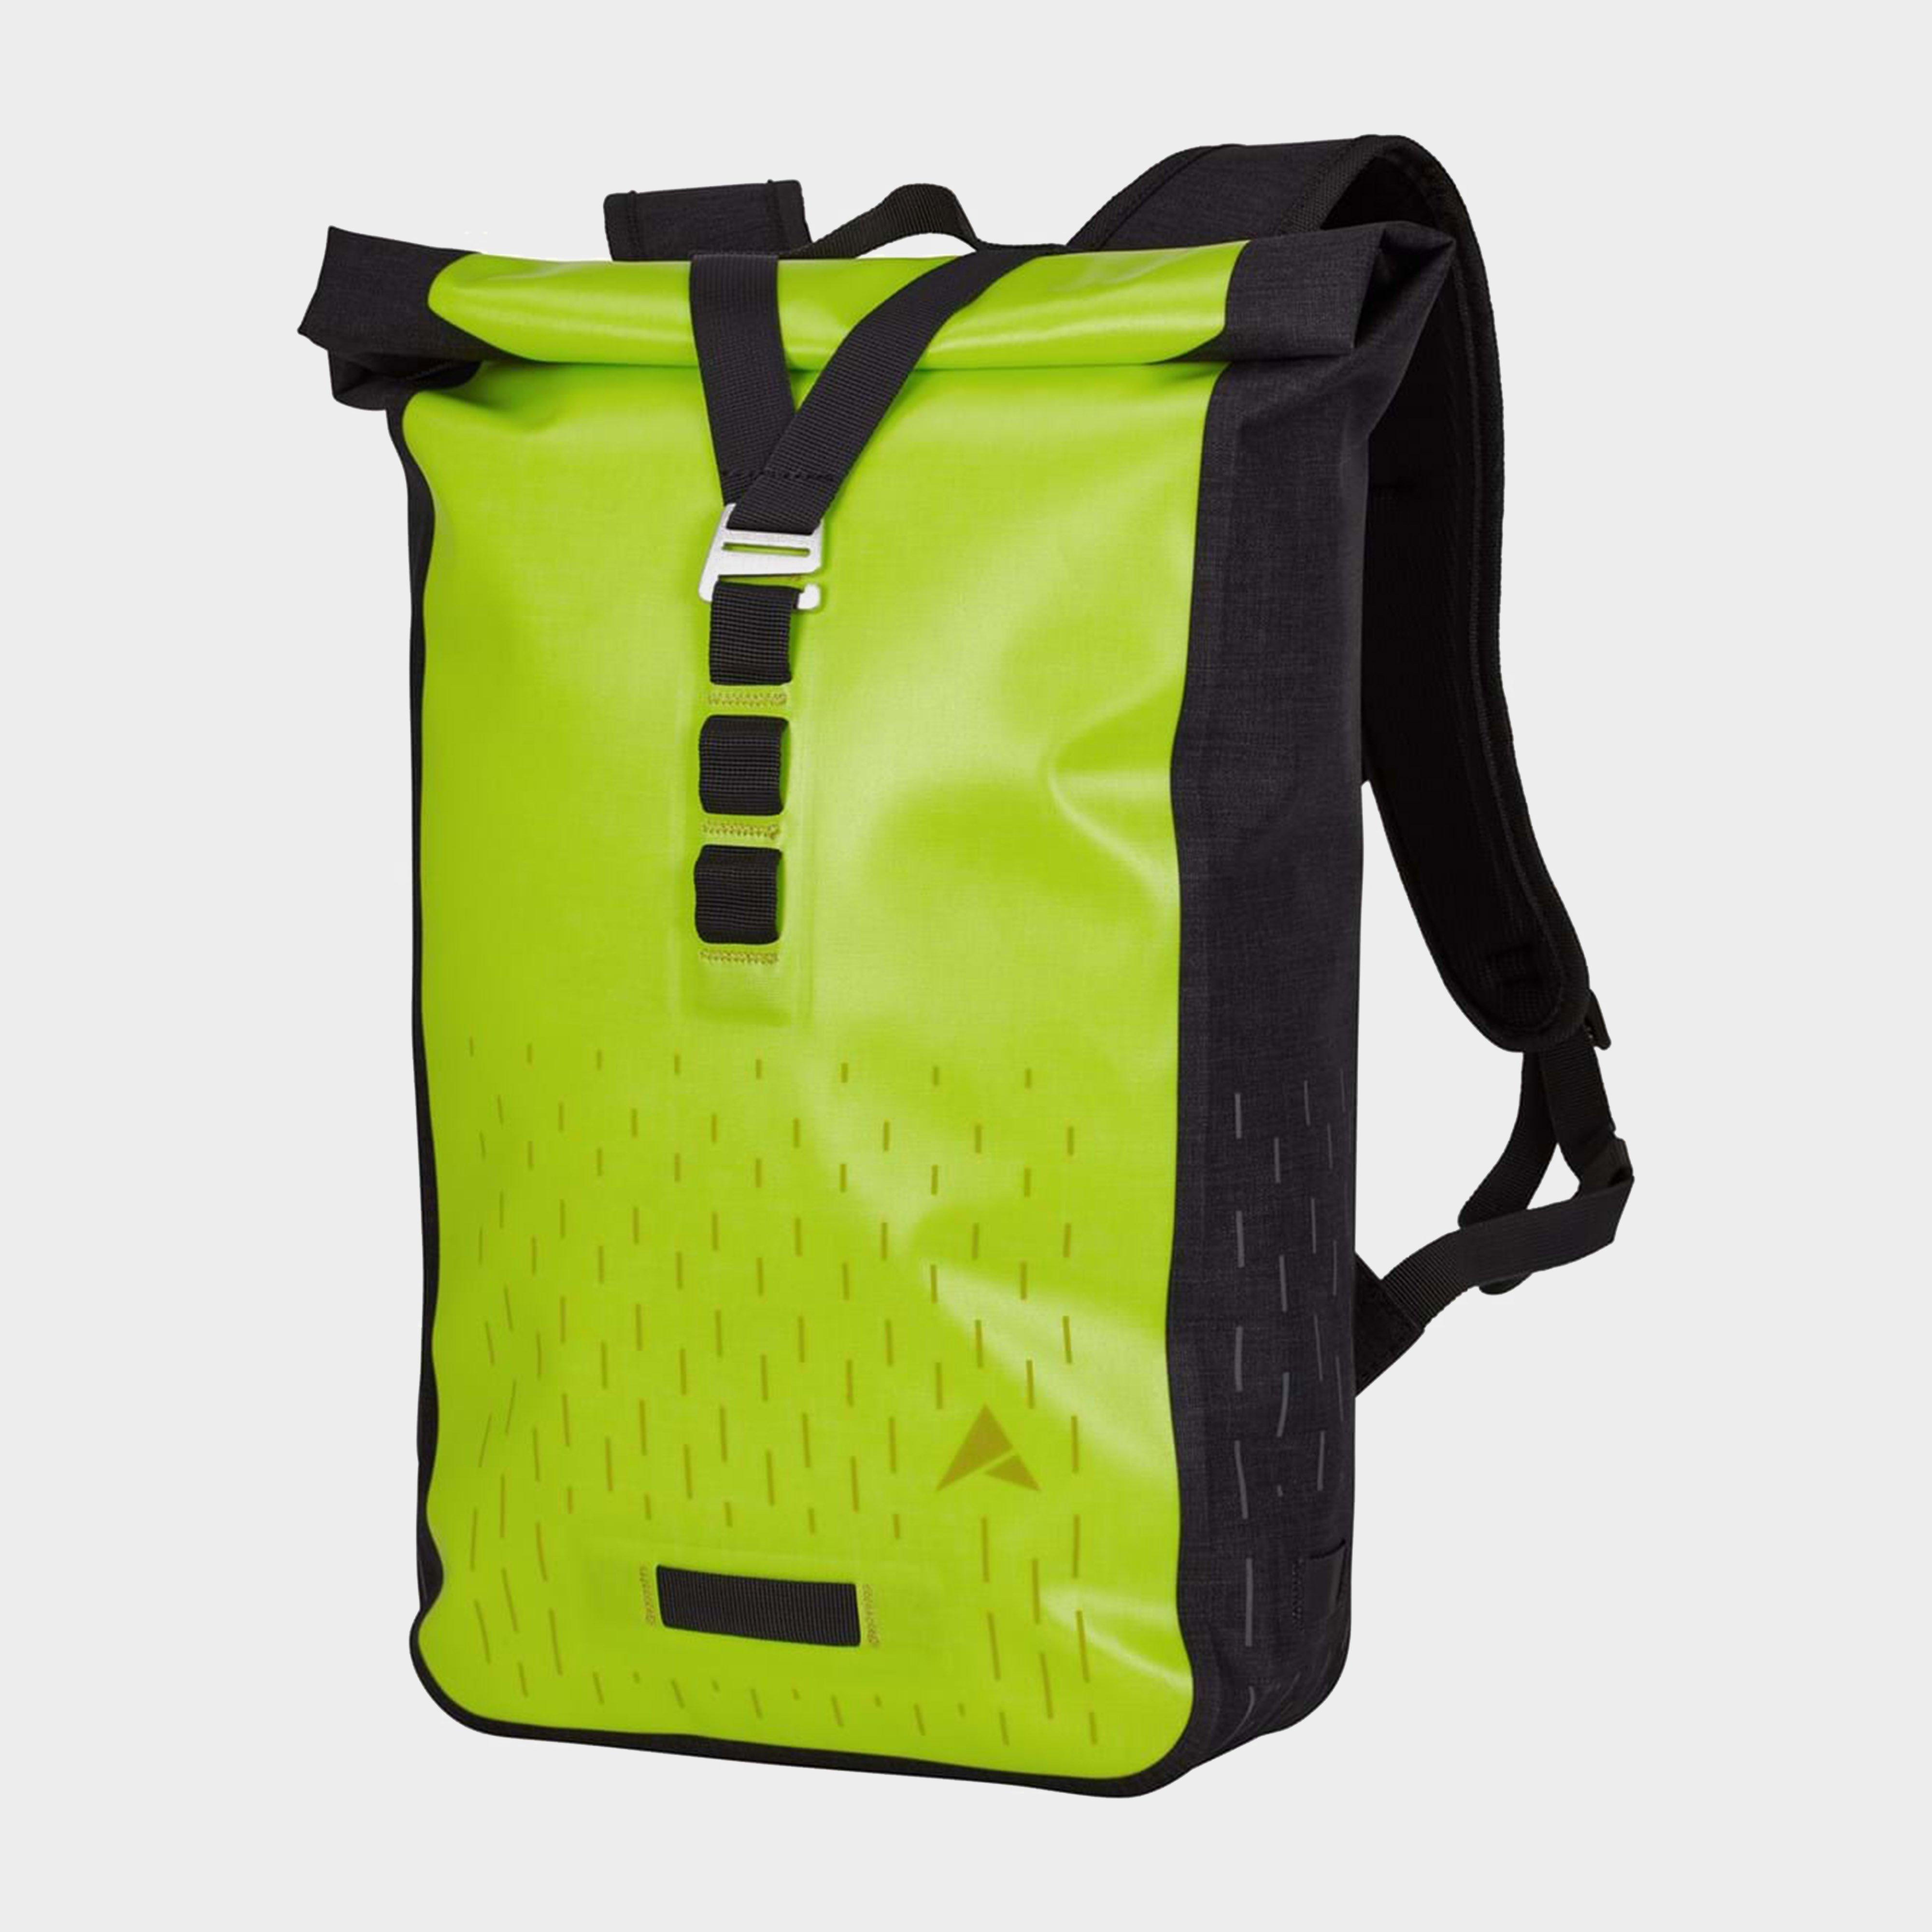 Altura Thunderstorm City 20 Litre Backpack - Yellow/yellow  Yellow/yellow